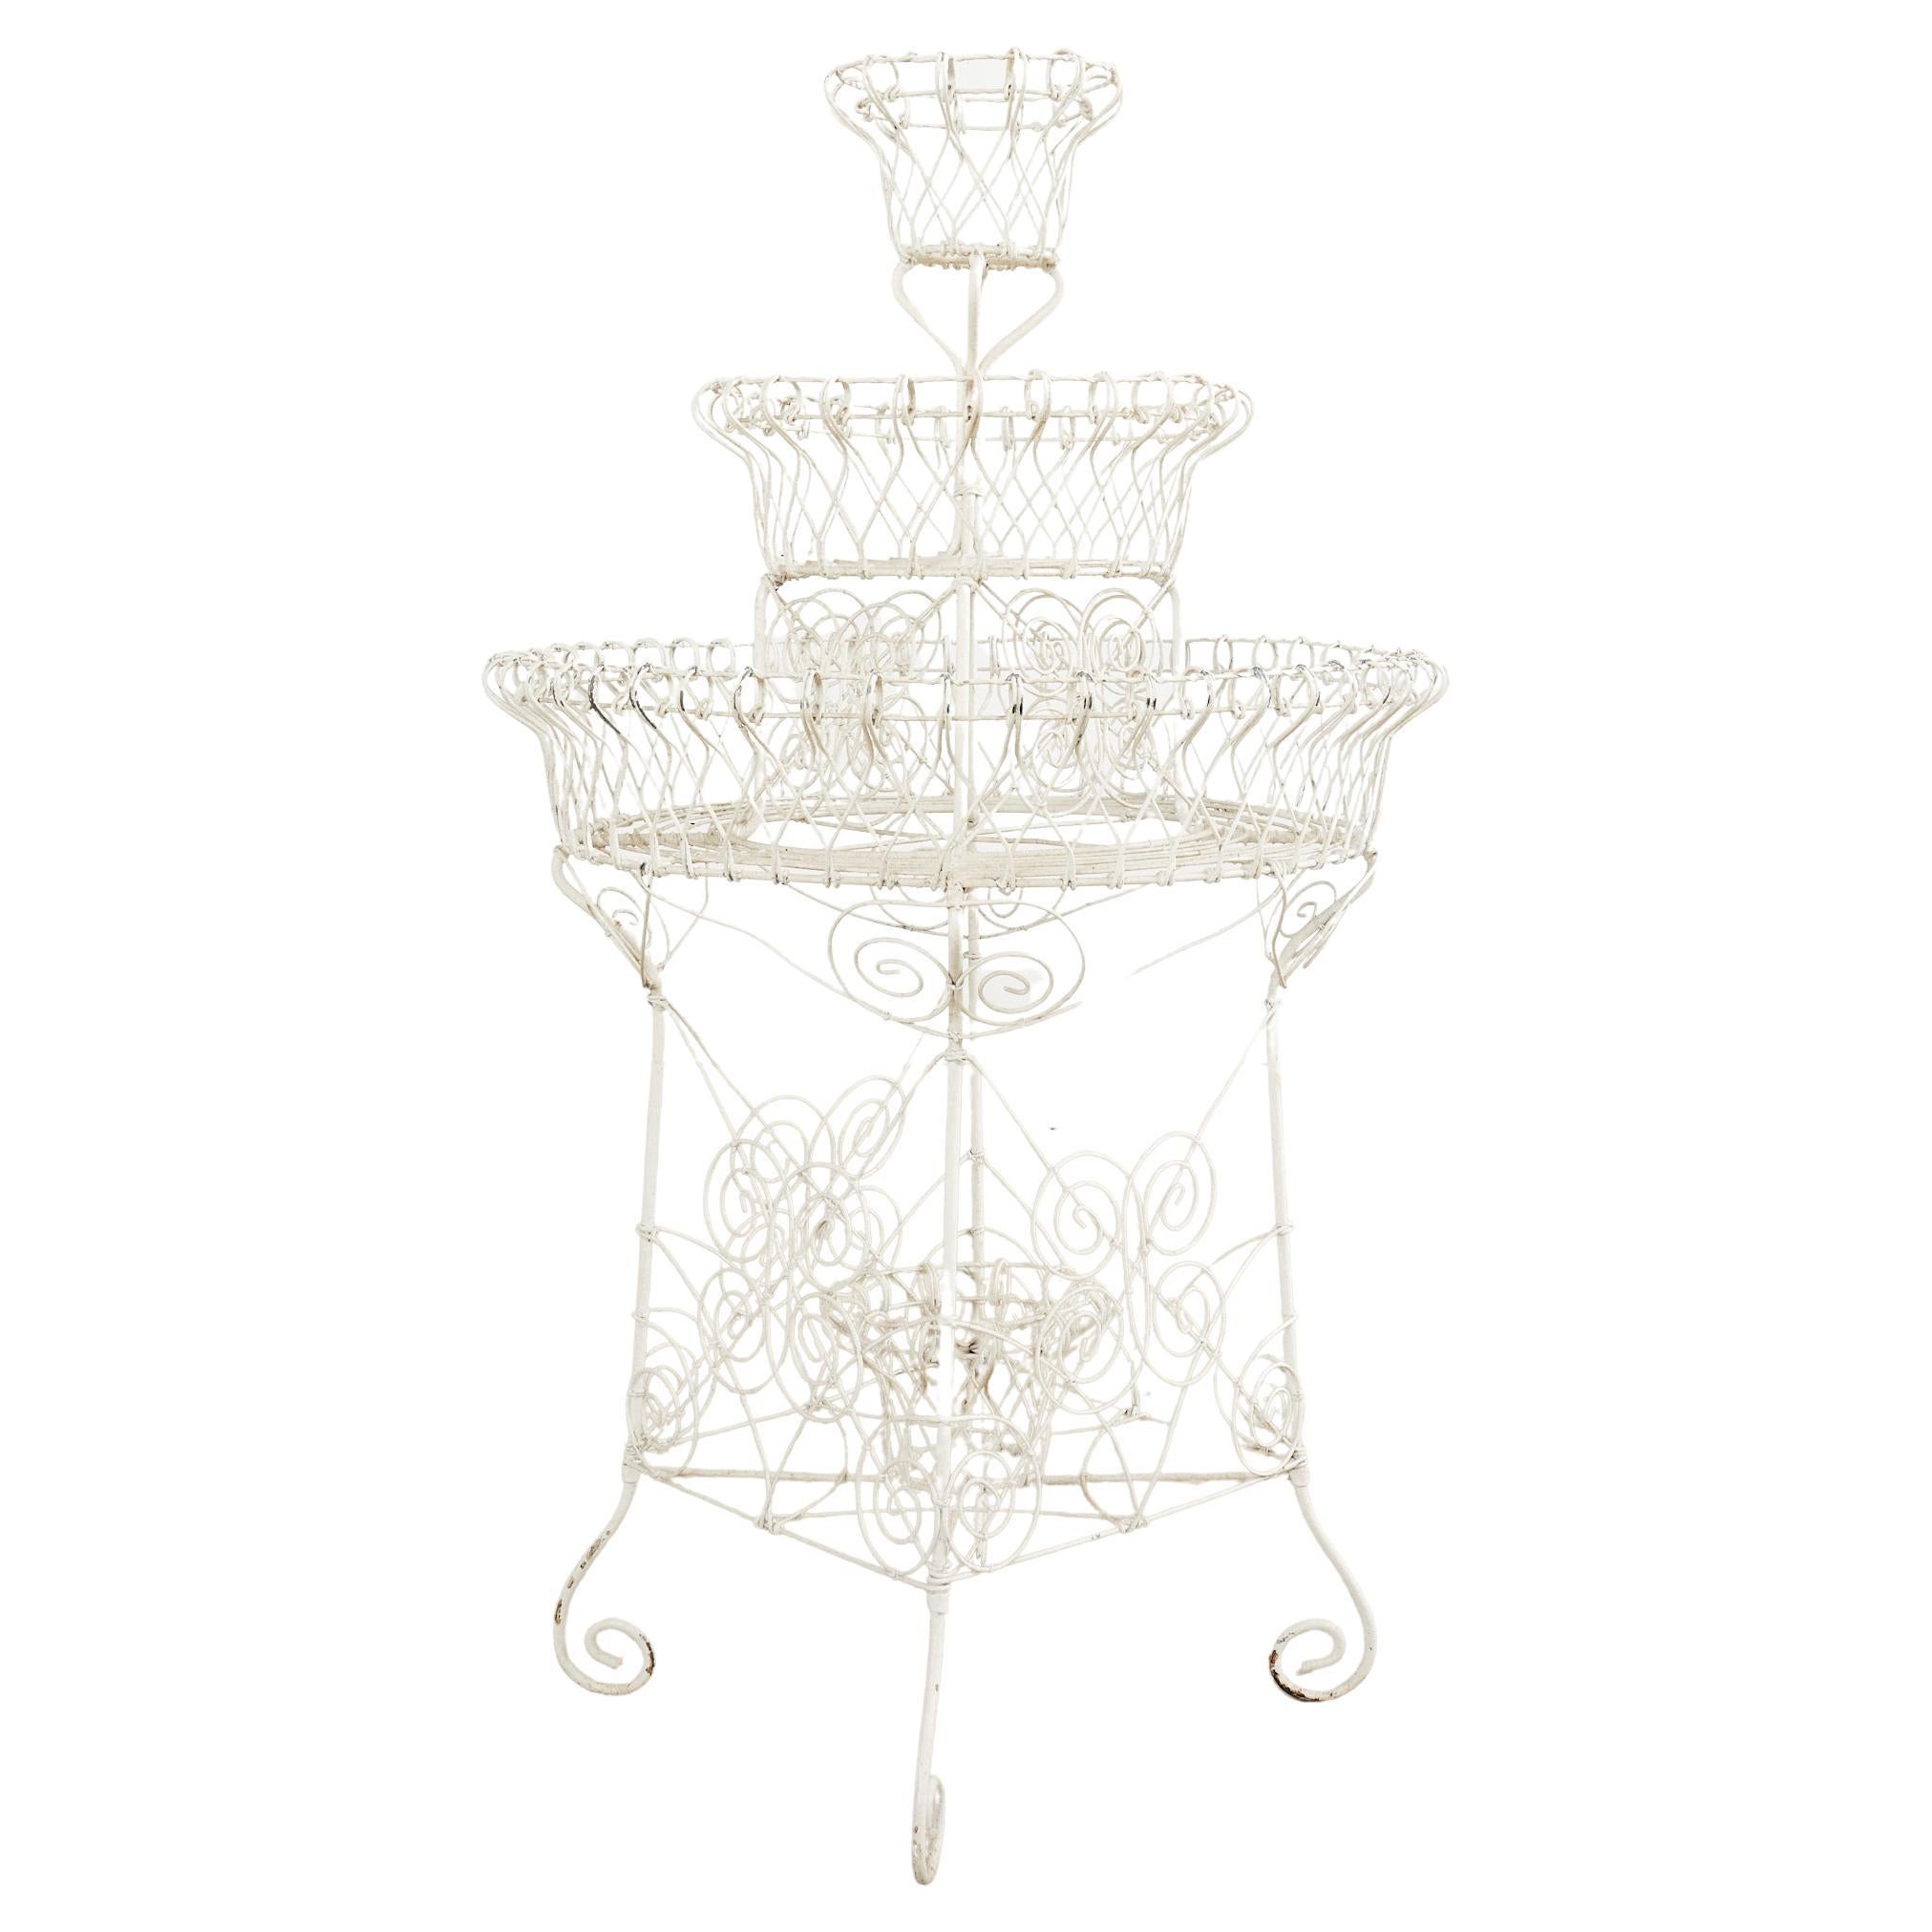 English Late Victorian Three Tier Iron and Wire Garden Plant Stand For Sale